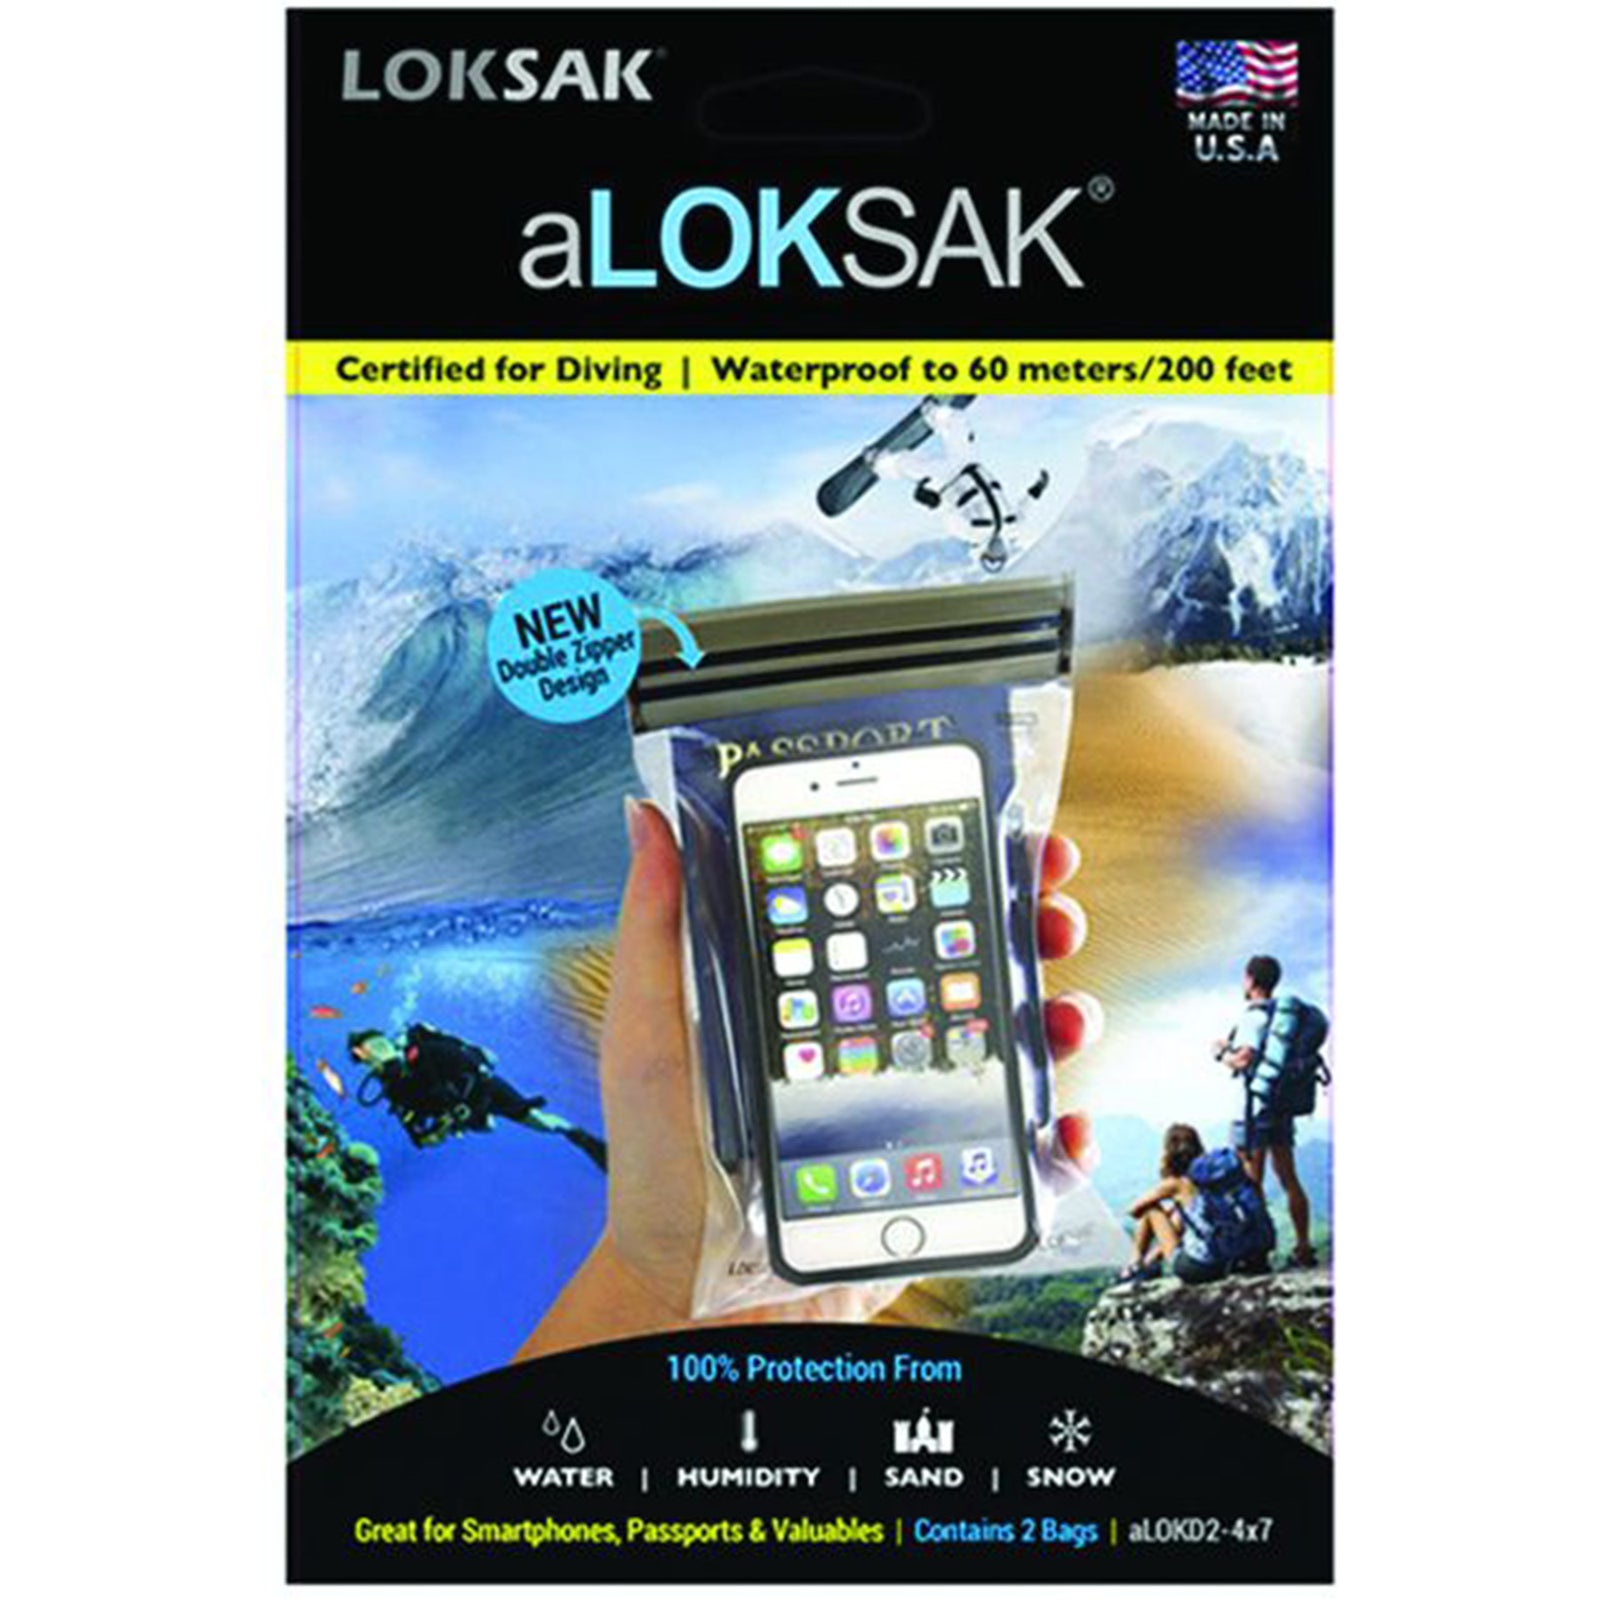 THE ALOKSAK WITH A PASSPORT AND CELLPHONE